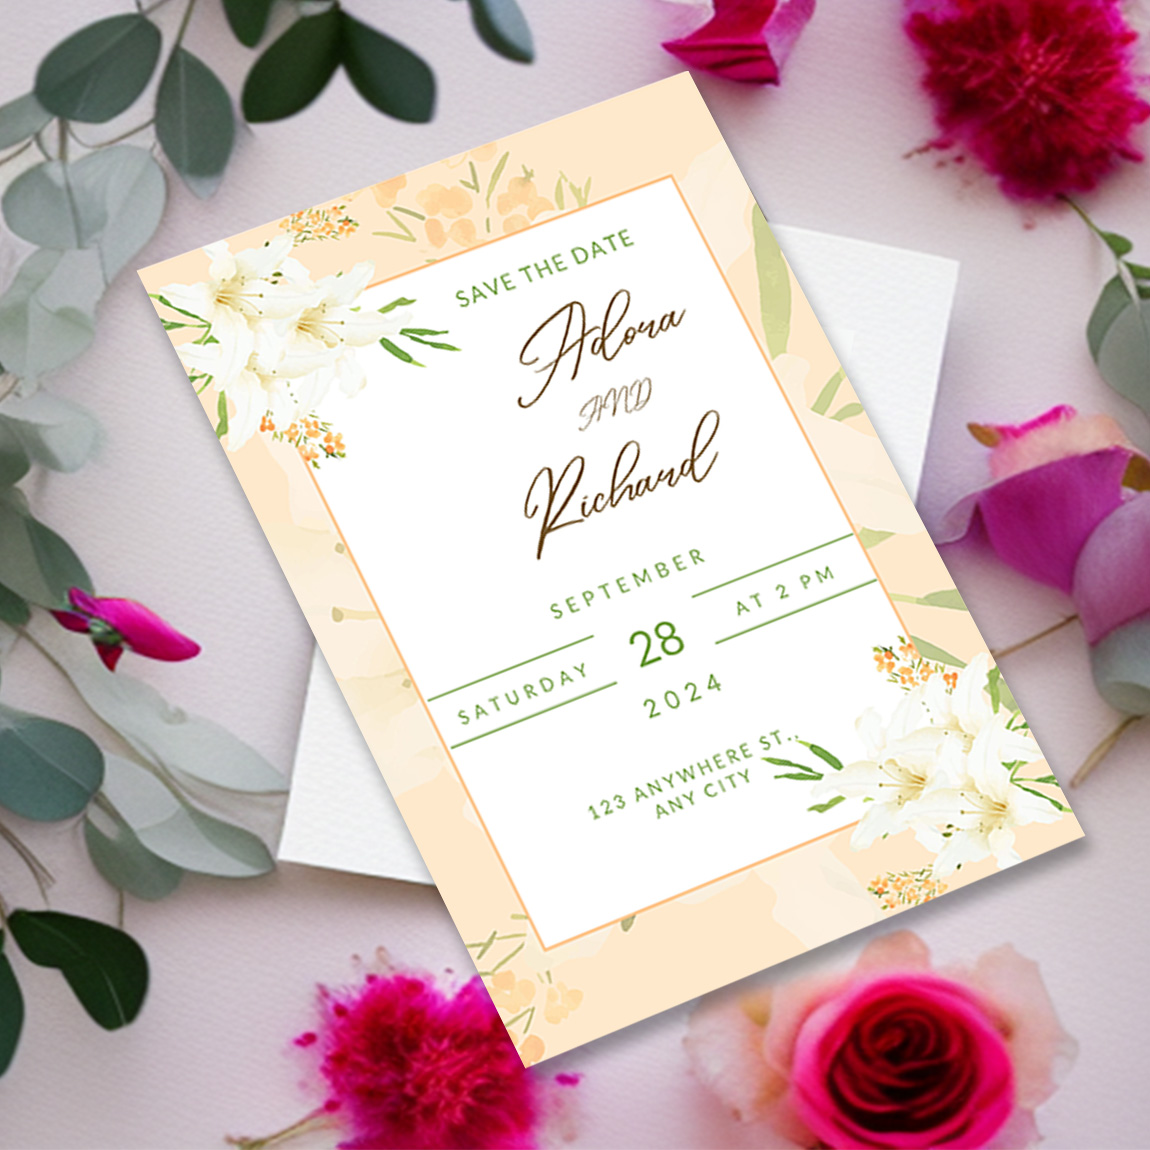 Image with elegant wedding invitation card with flowers.